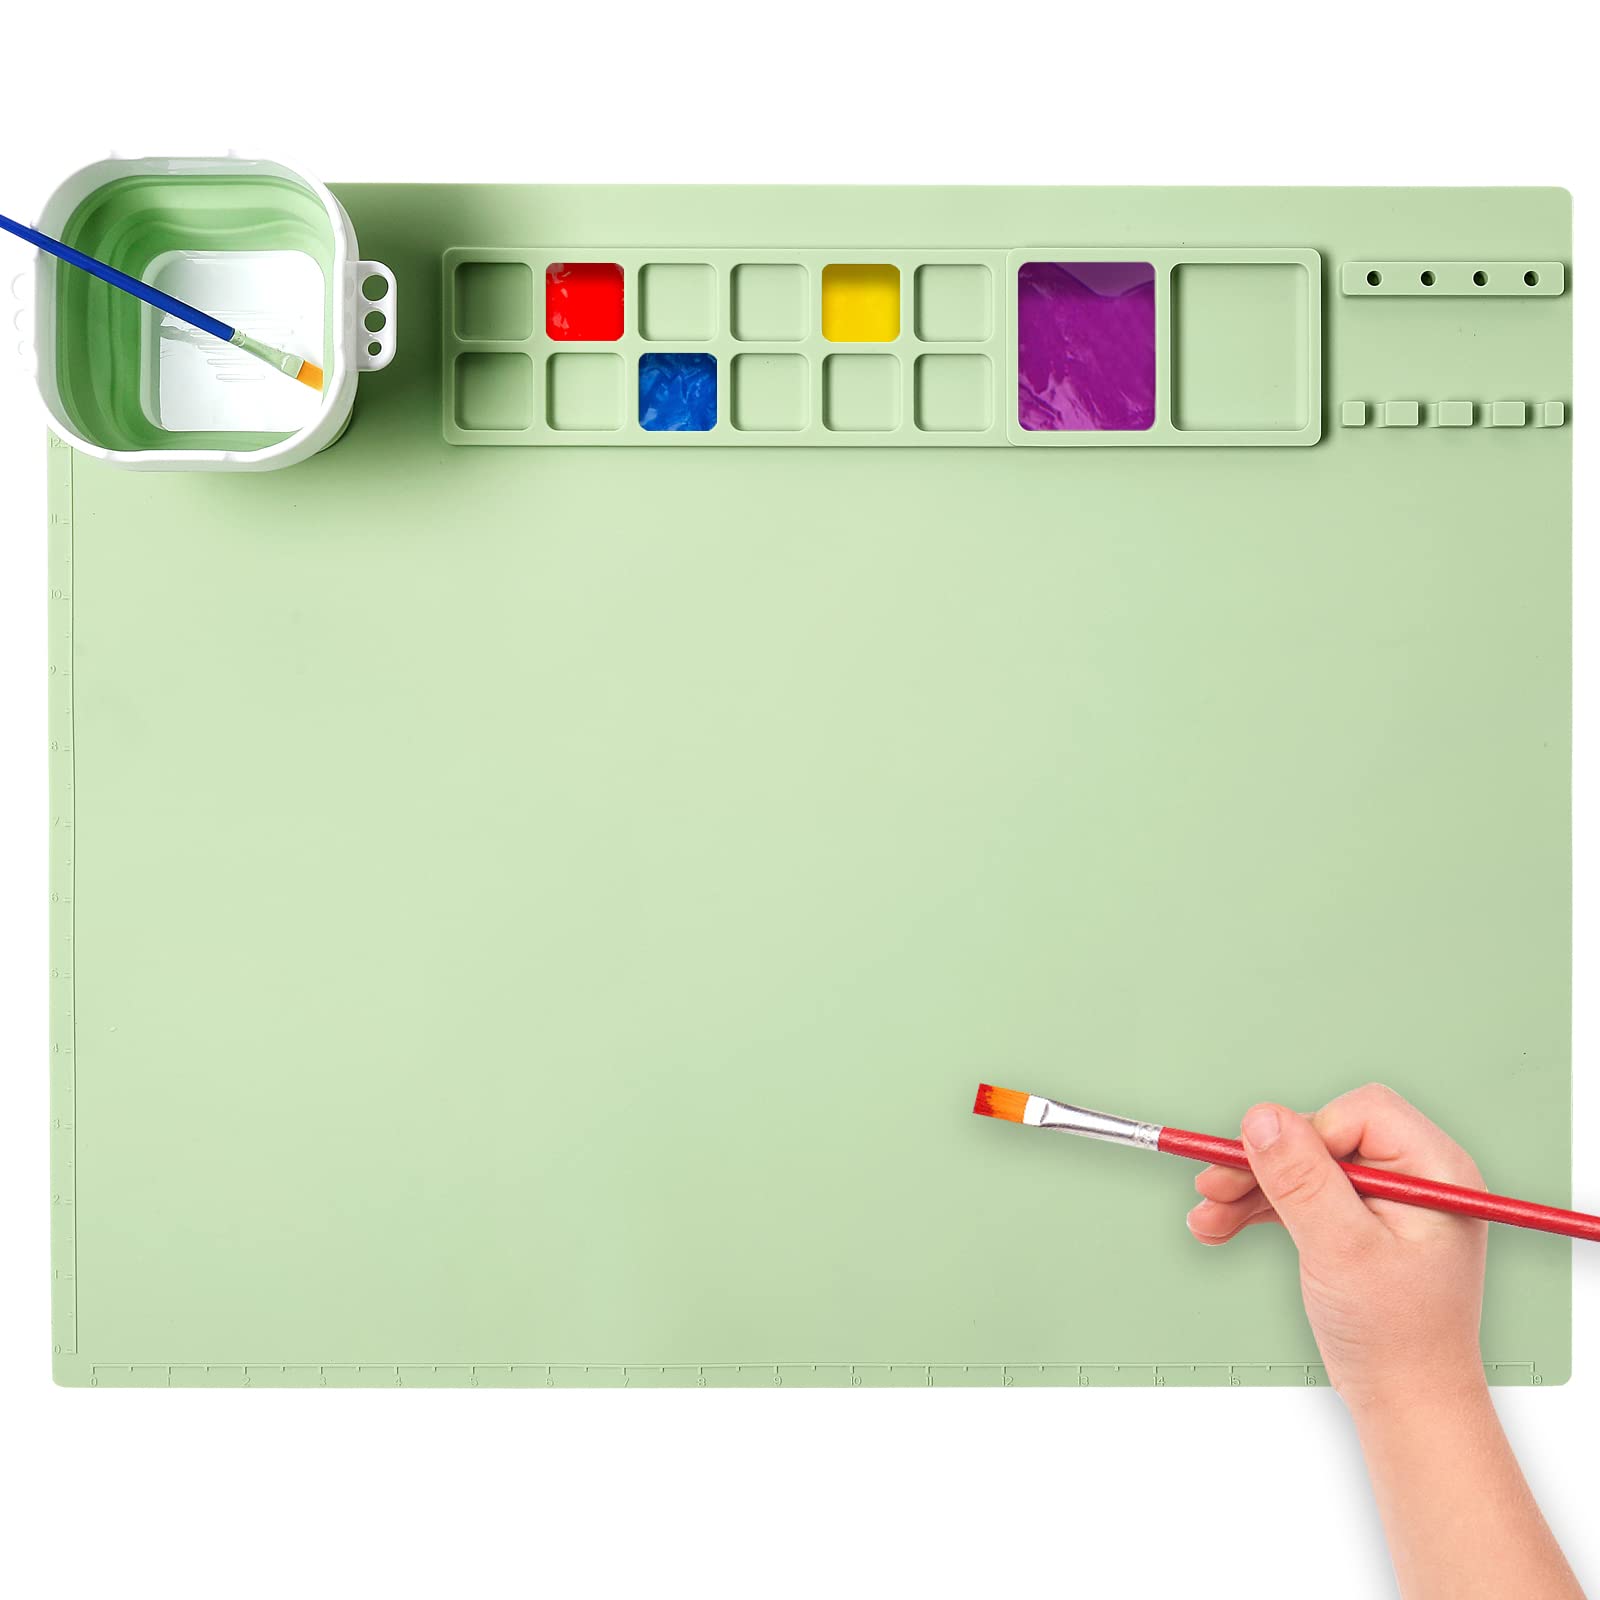 AWOKE Silicone Painting Mat - 20X16 Silicone Art Mat with 1 Water Cup for  Kids - Silcone Craft Mat has12 Color Dividers - 2 Paint Dividers (Green)  Green 20X16